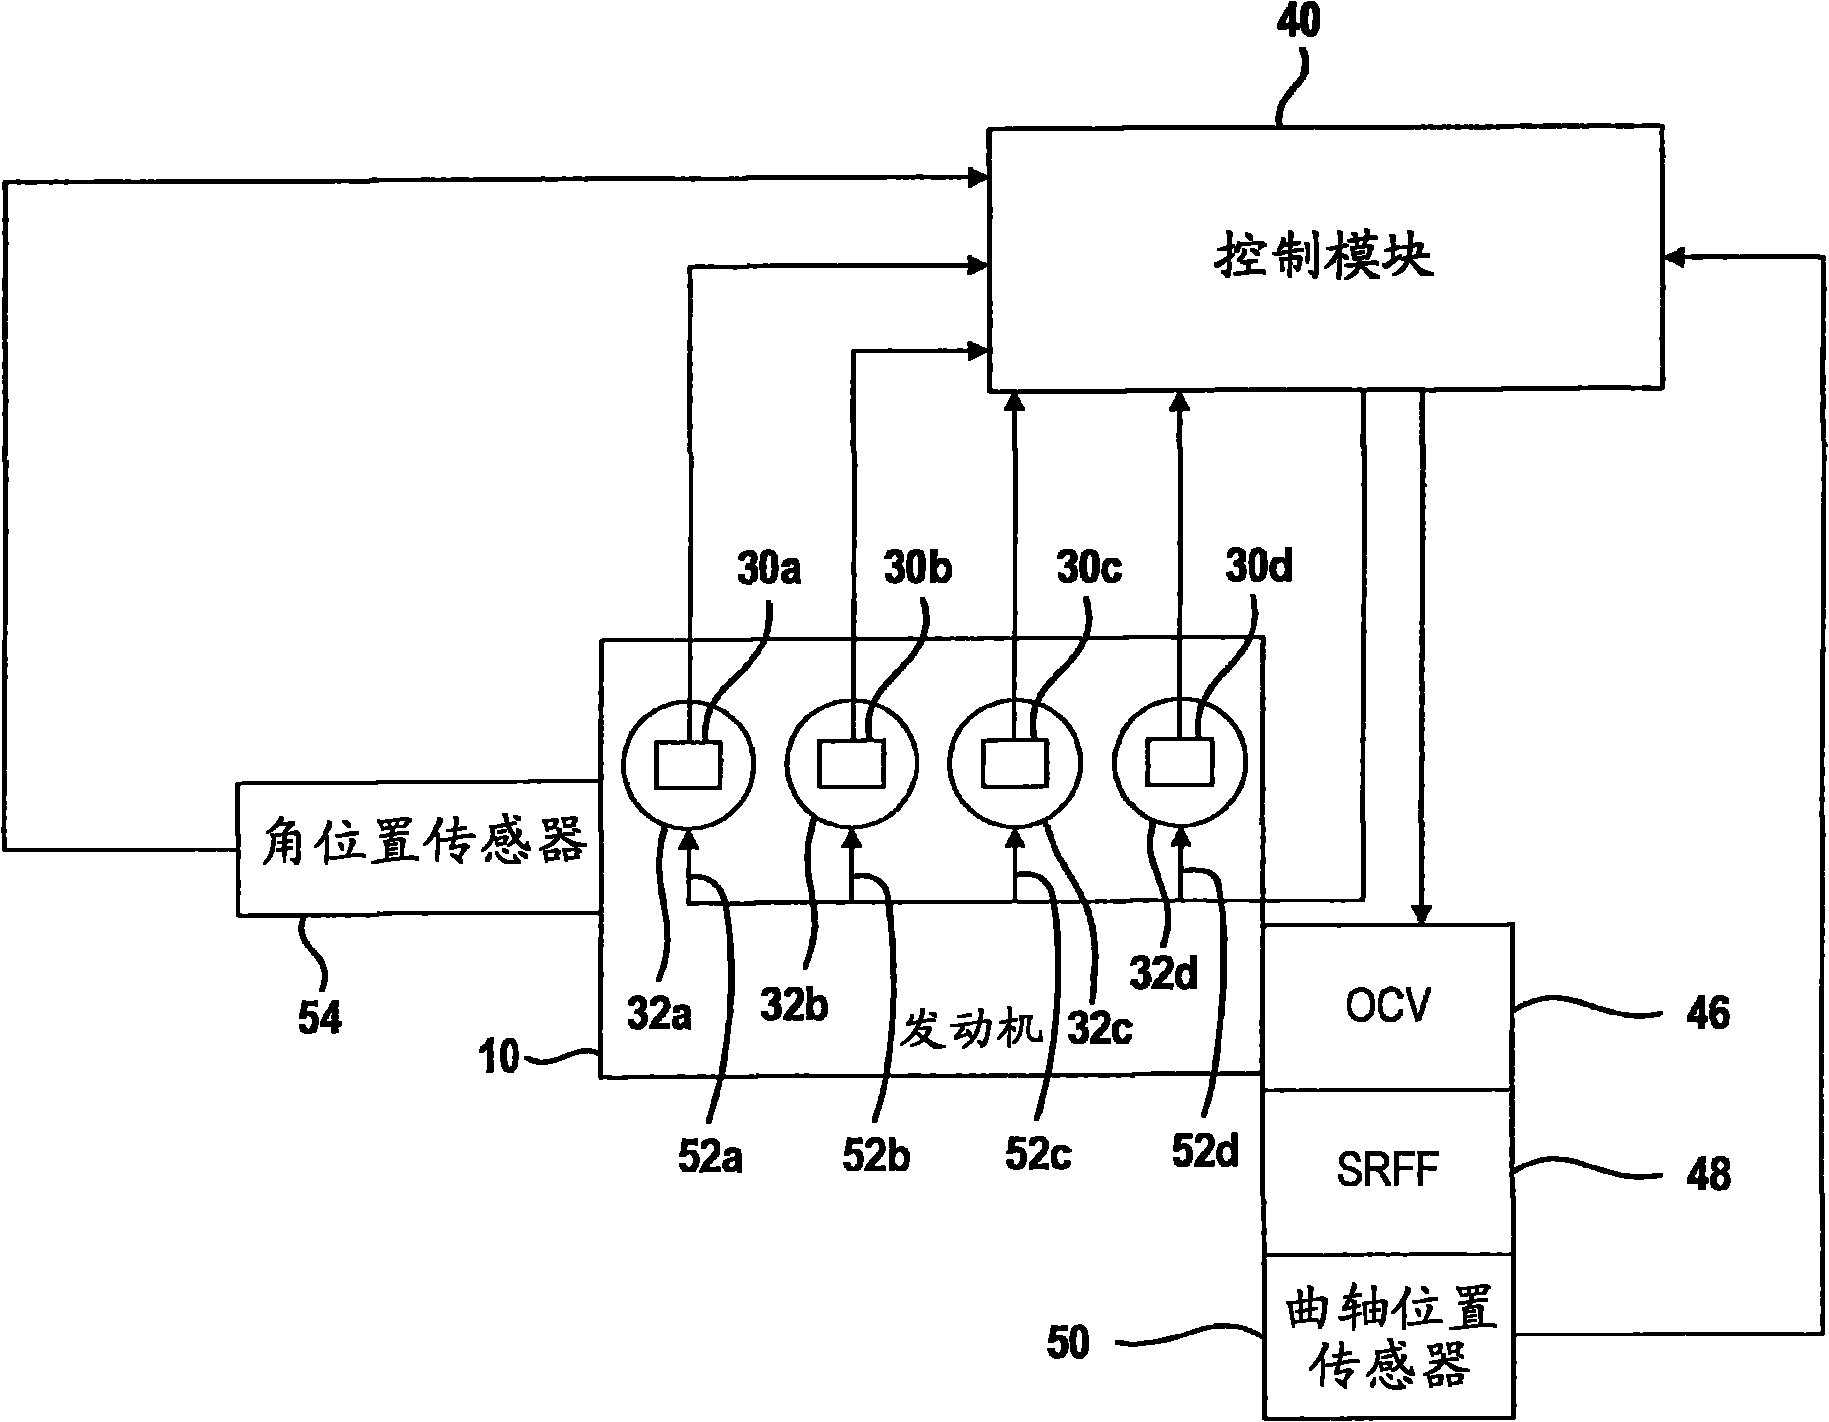 Method and system for controlling an engine using in-cylinder pressure sensor signals